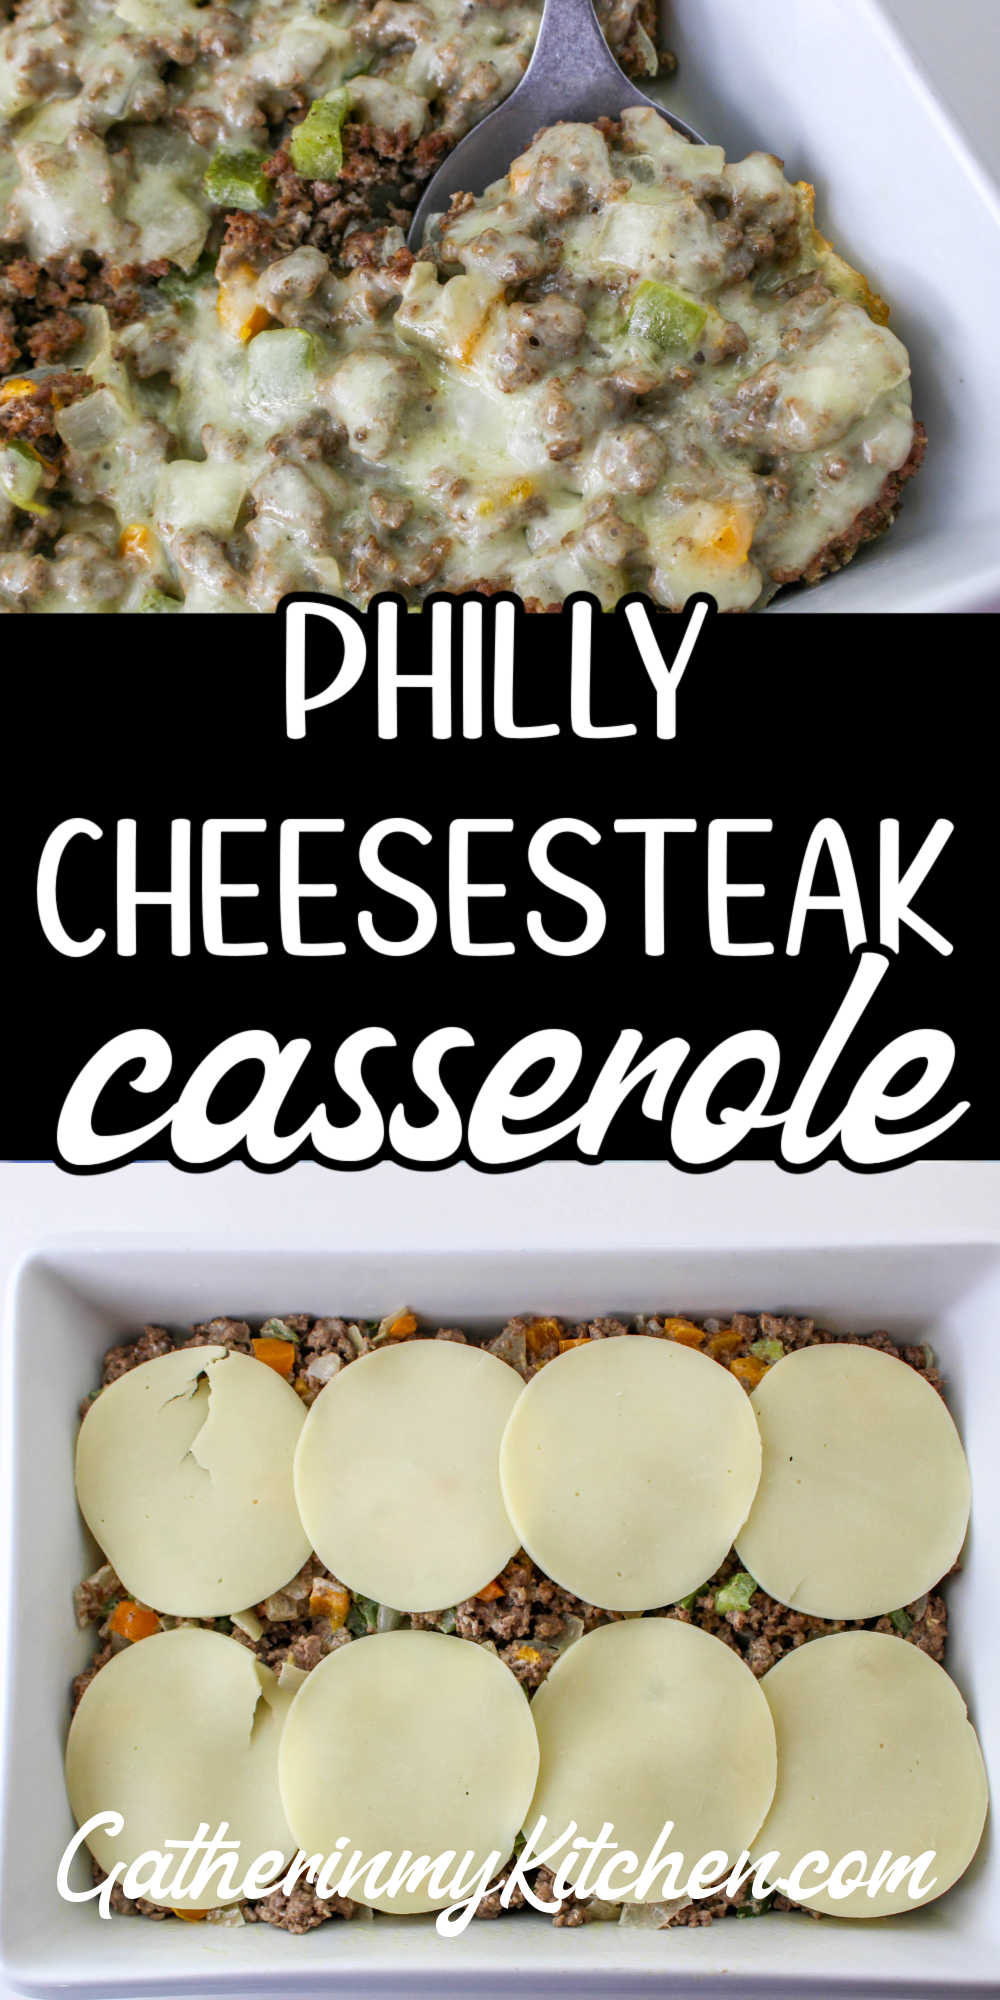 pin image: top is a spoonful of philly cheesesteak casserole, the middle says "Philly Cheesesteak casserole" and bottom is a tray of unbaked cheesesteak casserole with cheese on top